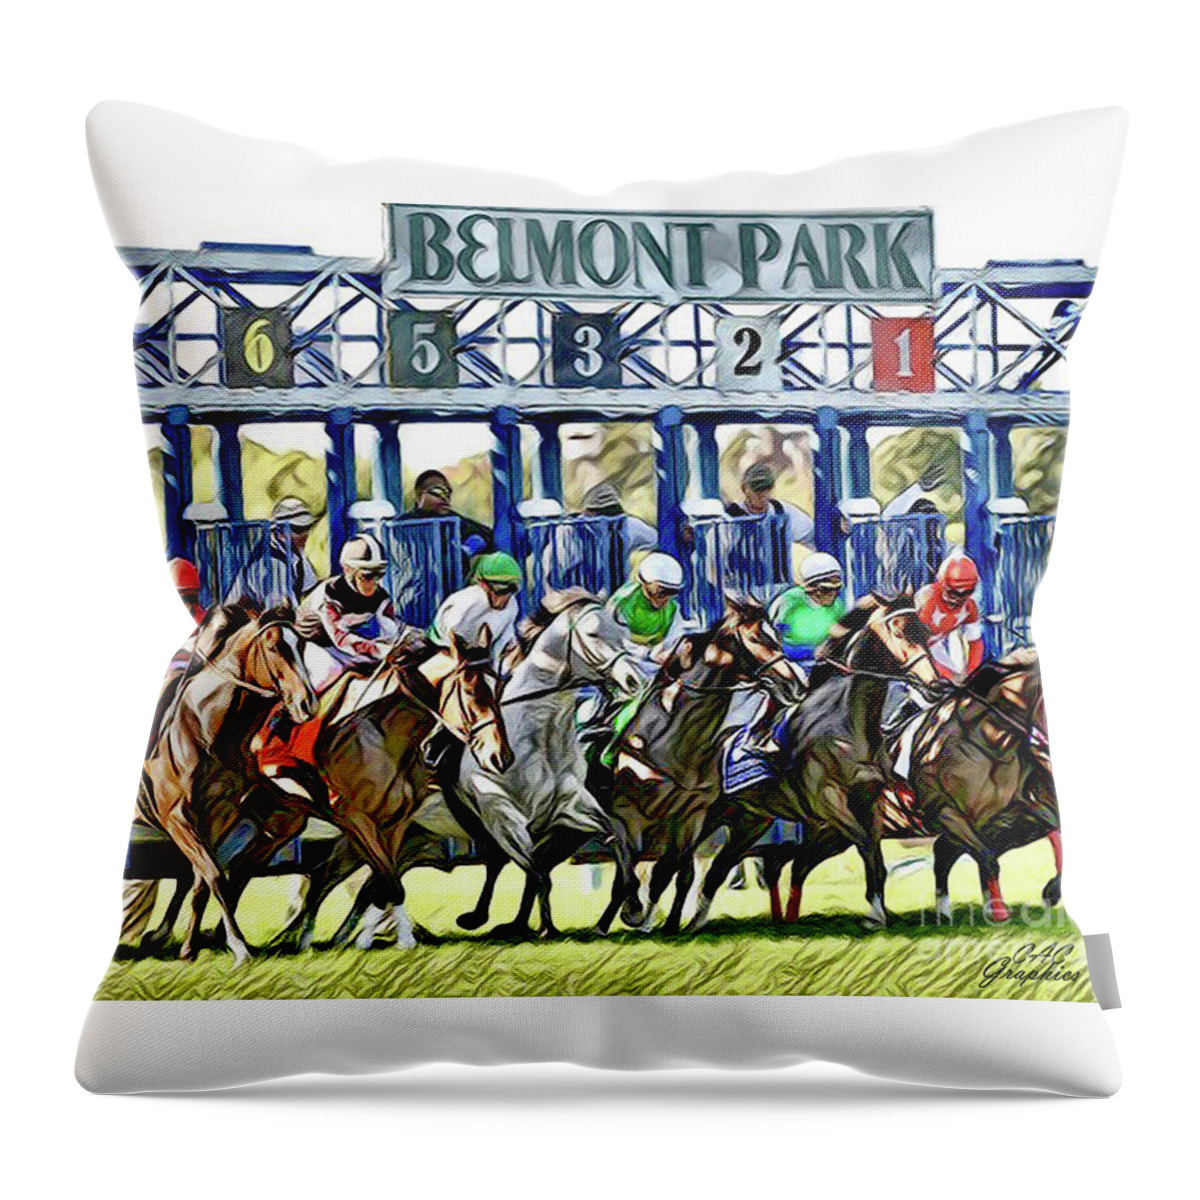 Belmont Park Throw Pillow featuring the digital art Belmont Park Starting Gate 1 by CAC Graphics